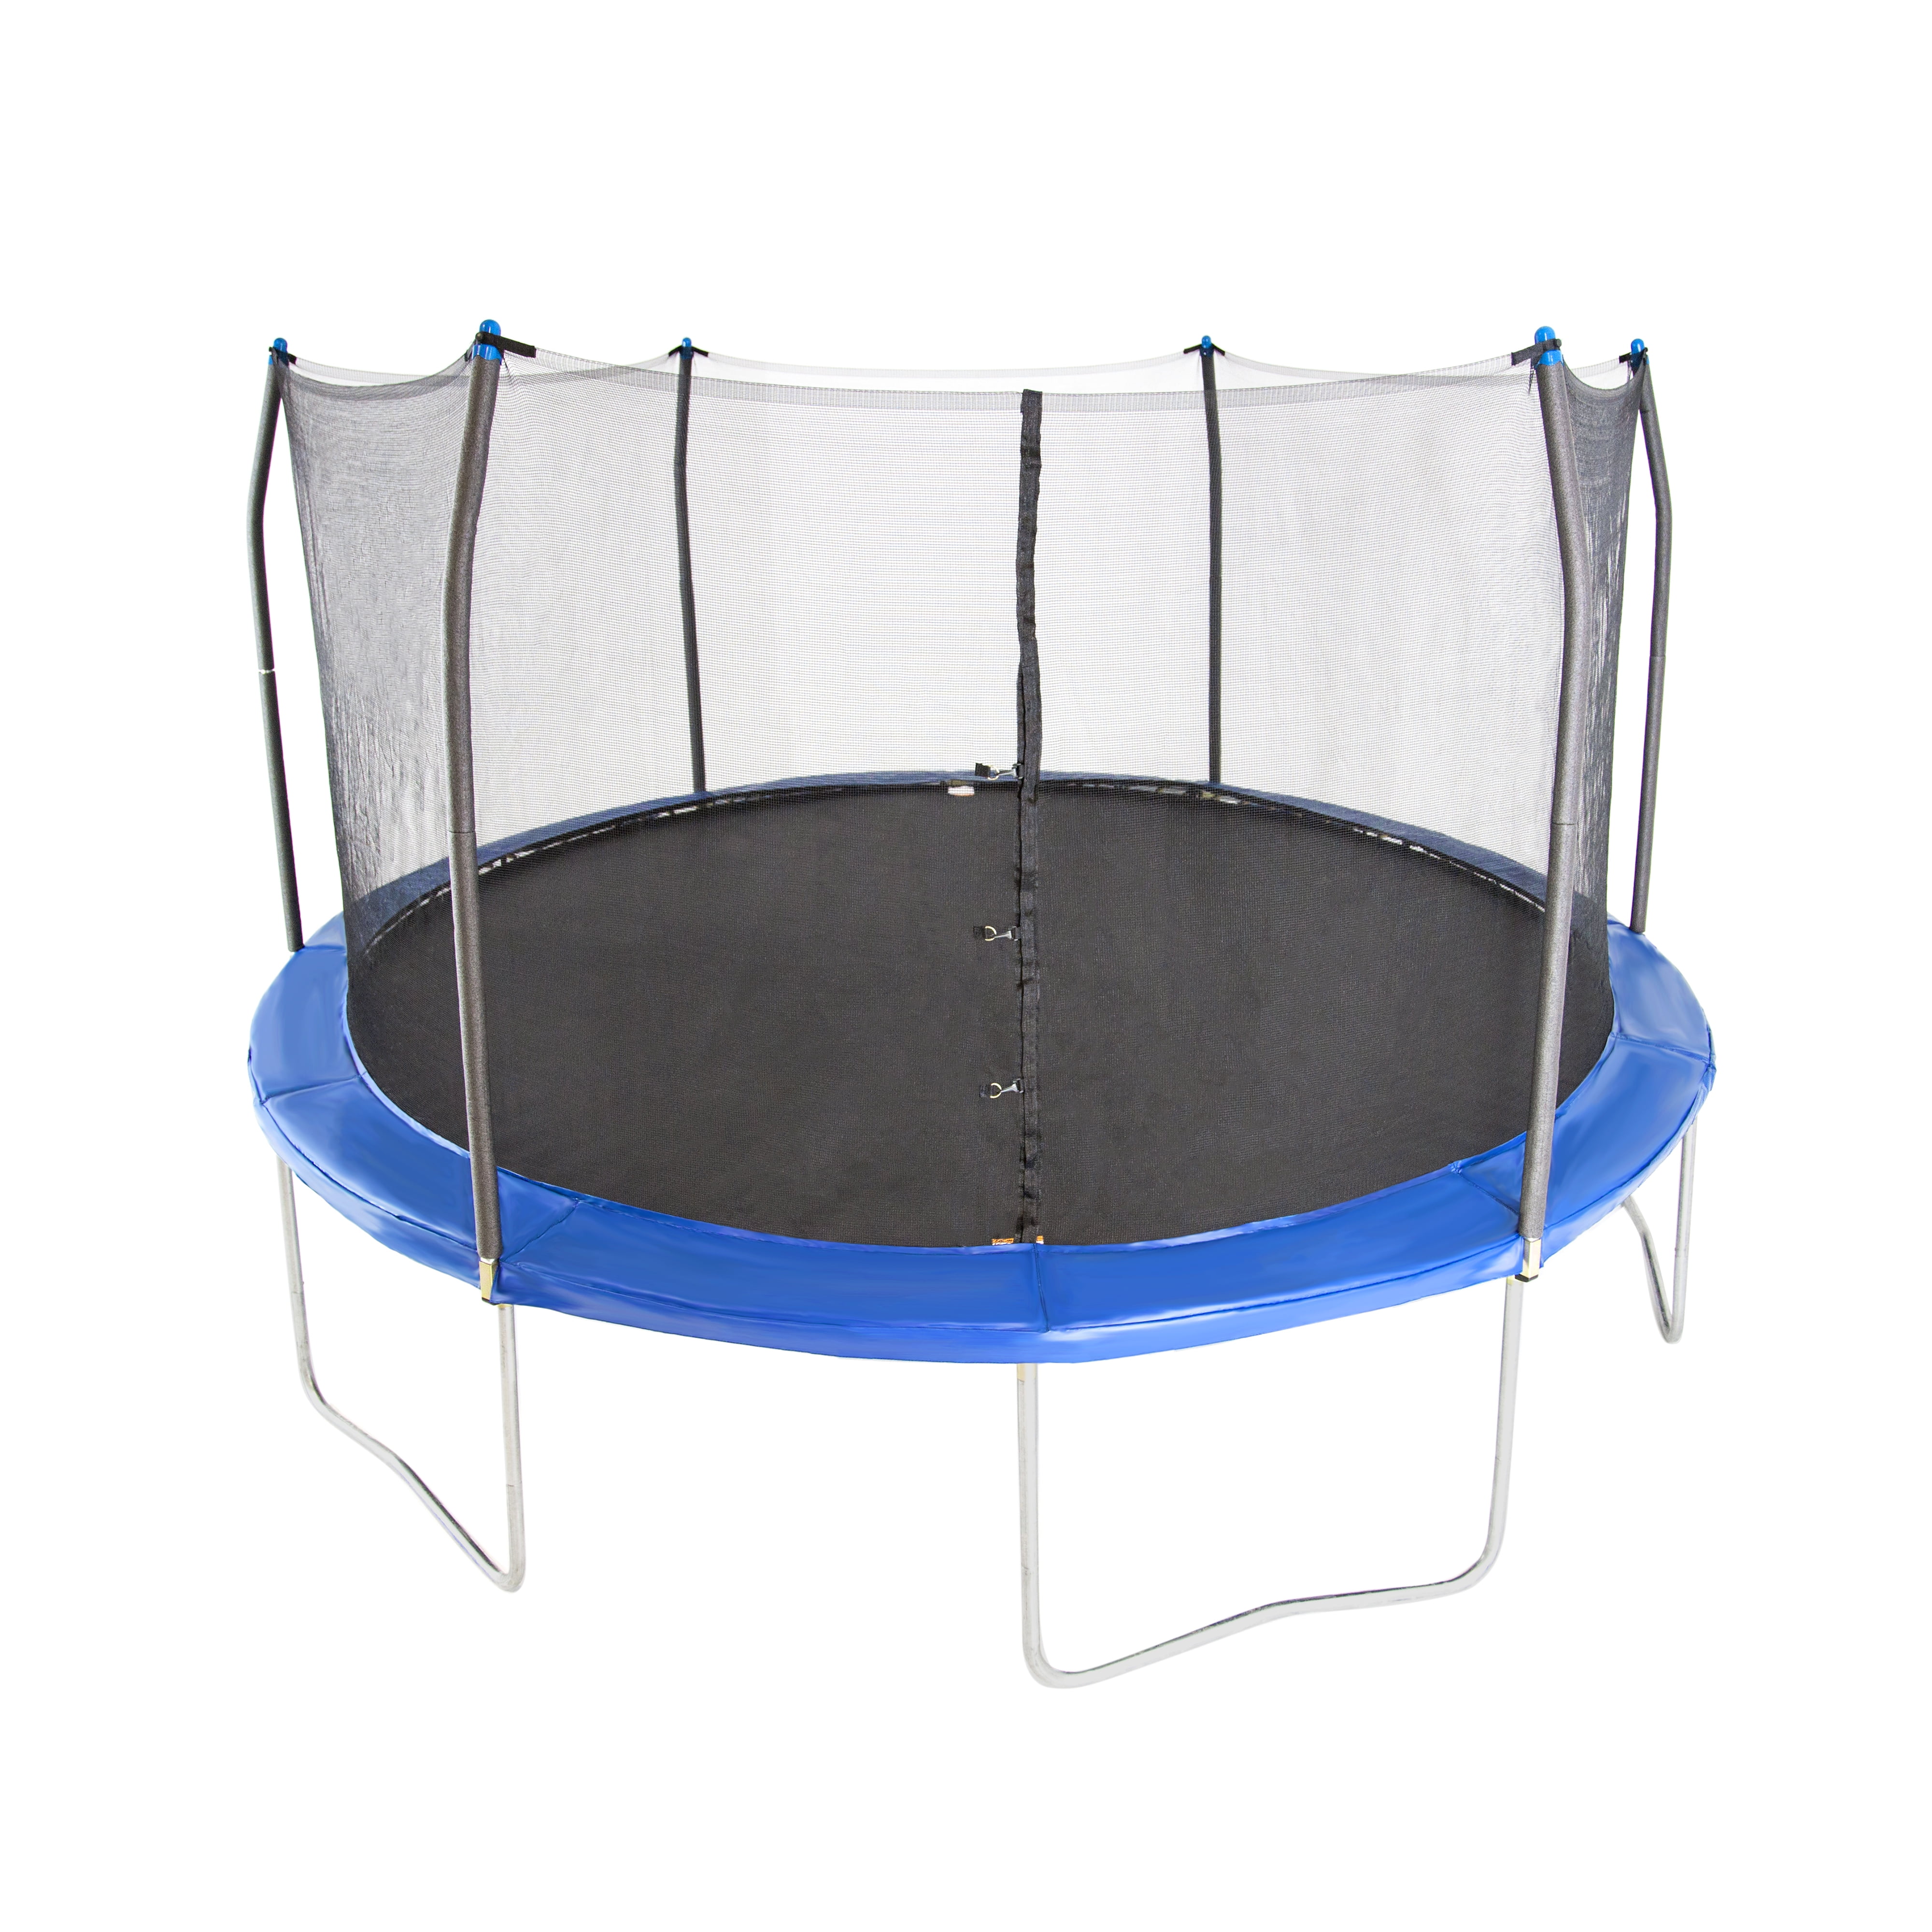 Heavy Duty Steel Frame,Mini Trampoline for Indoor/Outdoor,Great Gifts for Kids Vibolaa 10 Ft Kids Trampoline w/Safety Enclosure Net,Spring Cover Padding Ship from USA Directly 